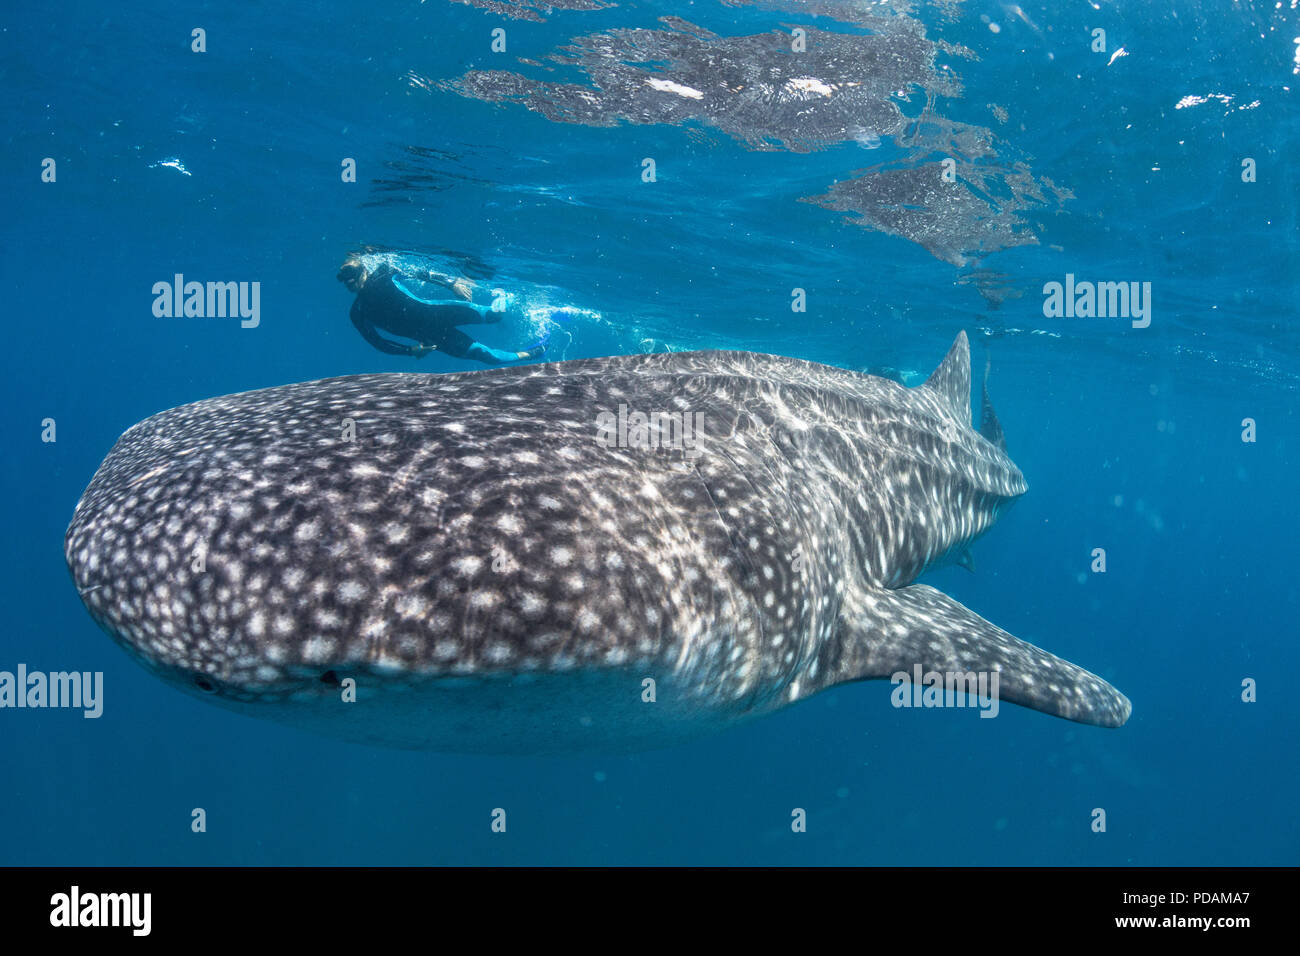 Young whale shark, Rhincodon typus, underwater with snorkeler at El Mogote, Baja California Sur, Mexico. Stock Photo